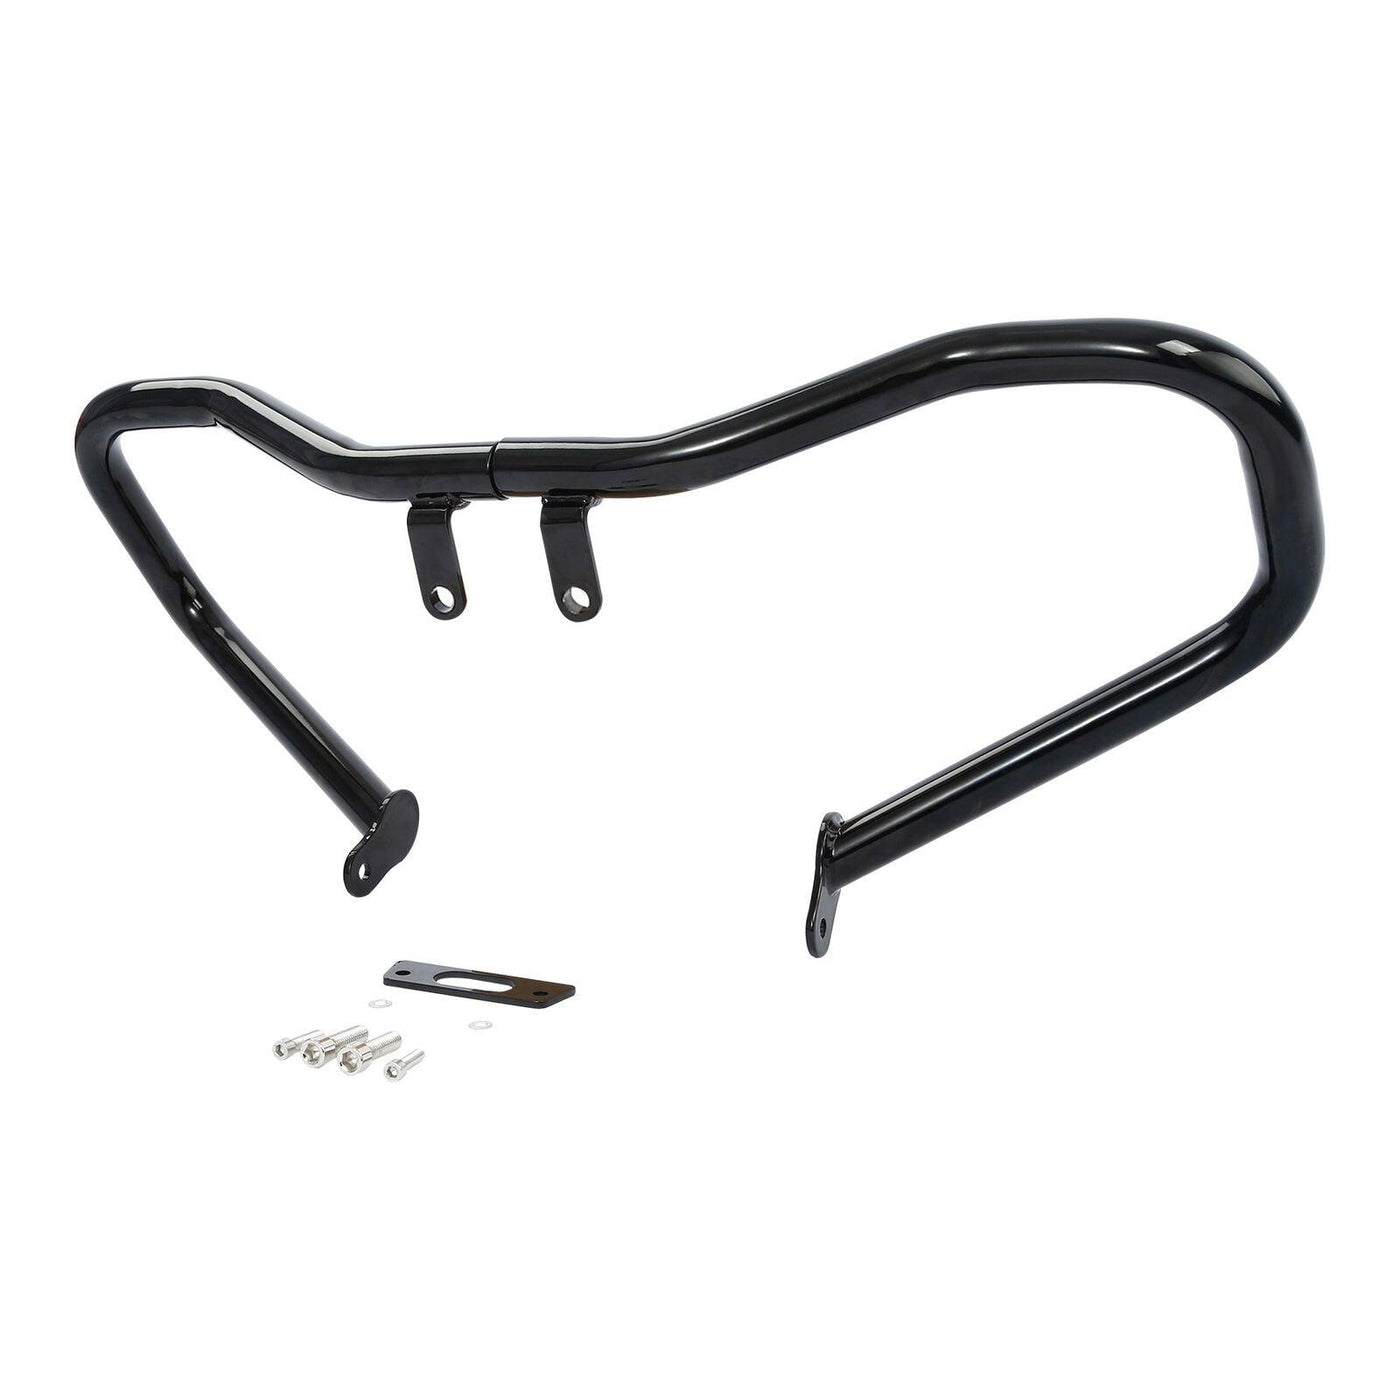 Chopped Engine Guard Crash Bar Fit For Harley Road King Street Glide 2014-2021 - Moto Life Products